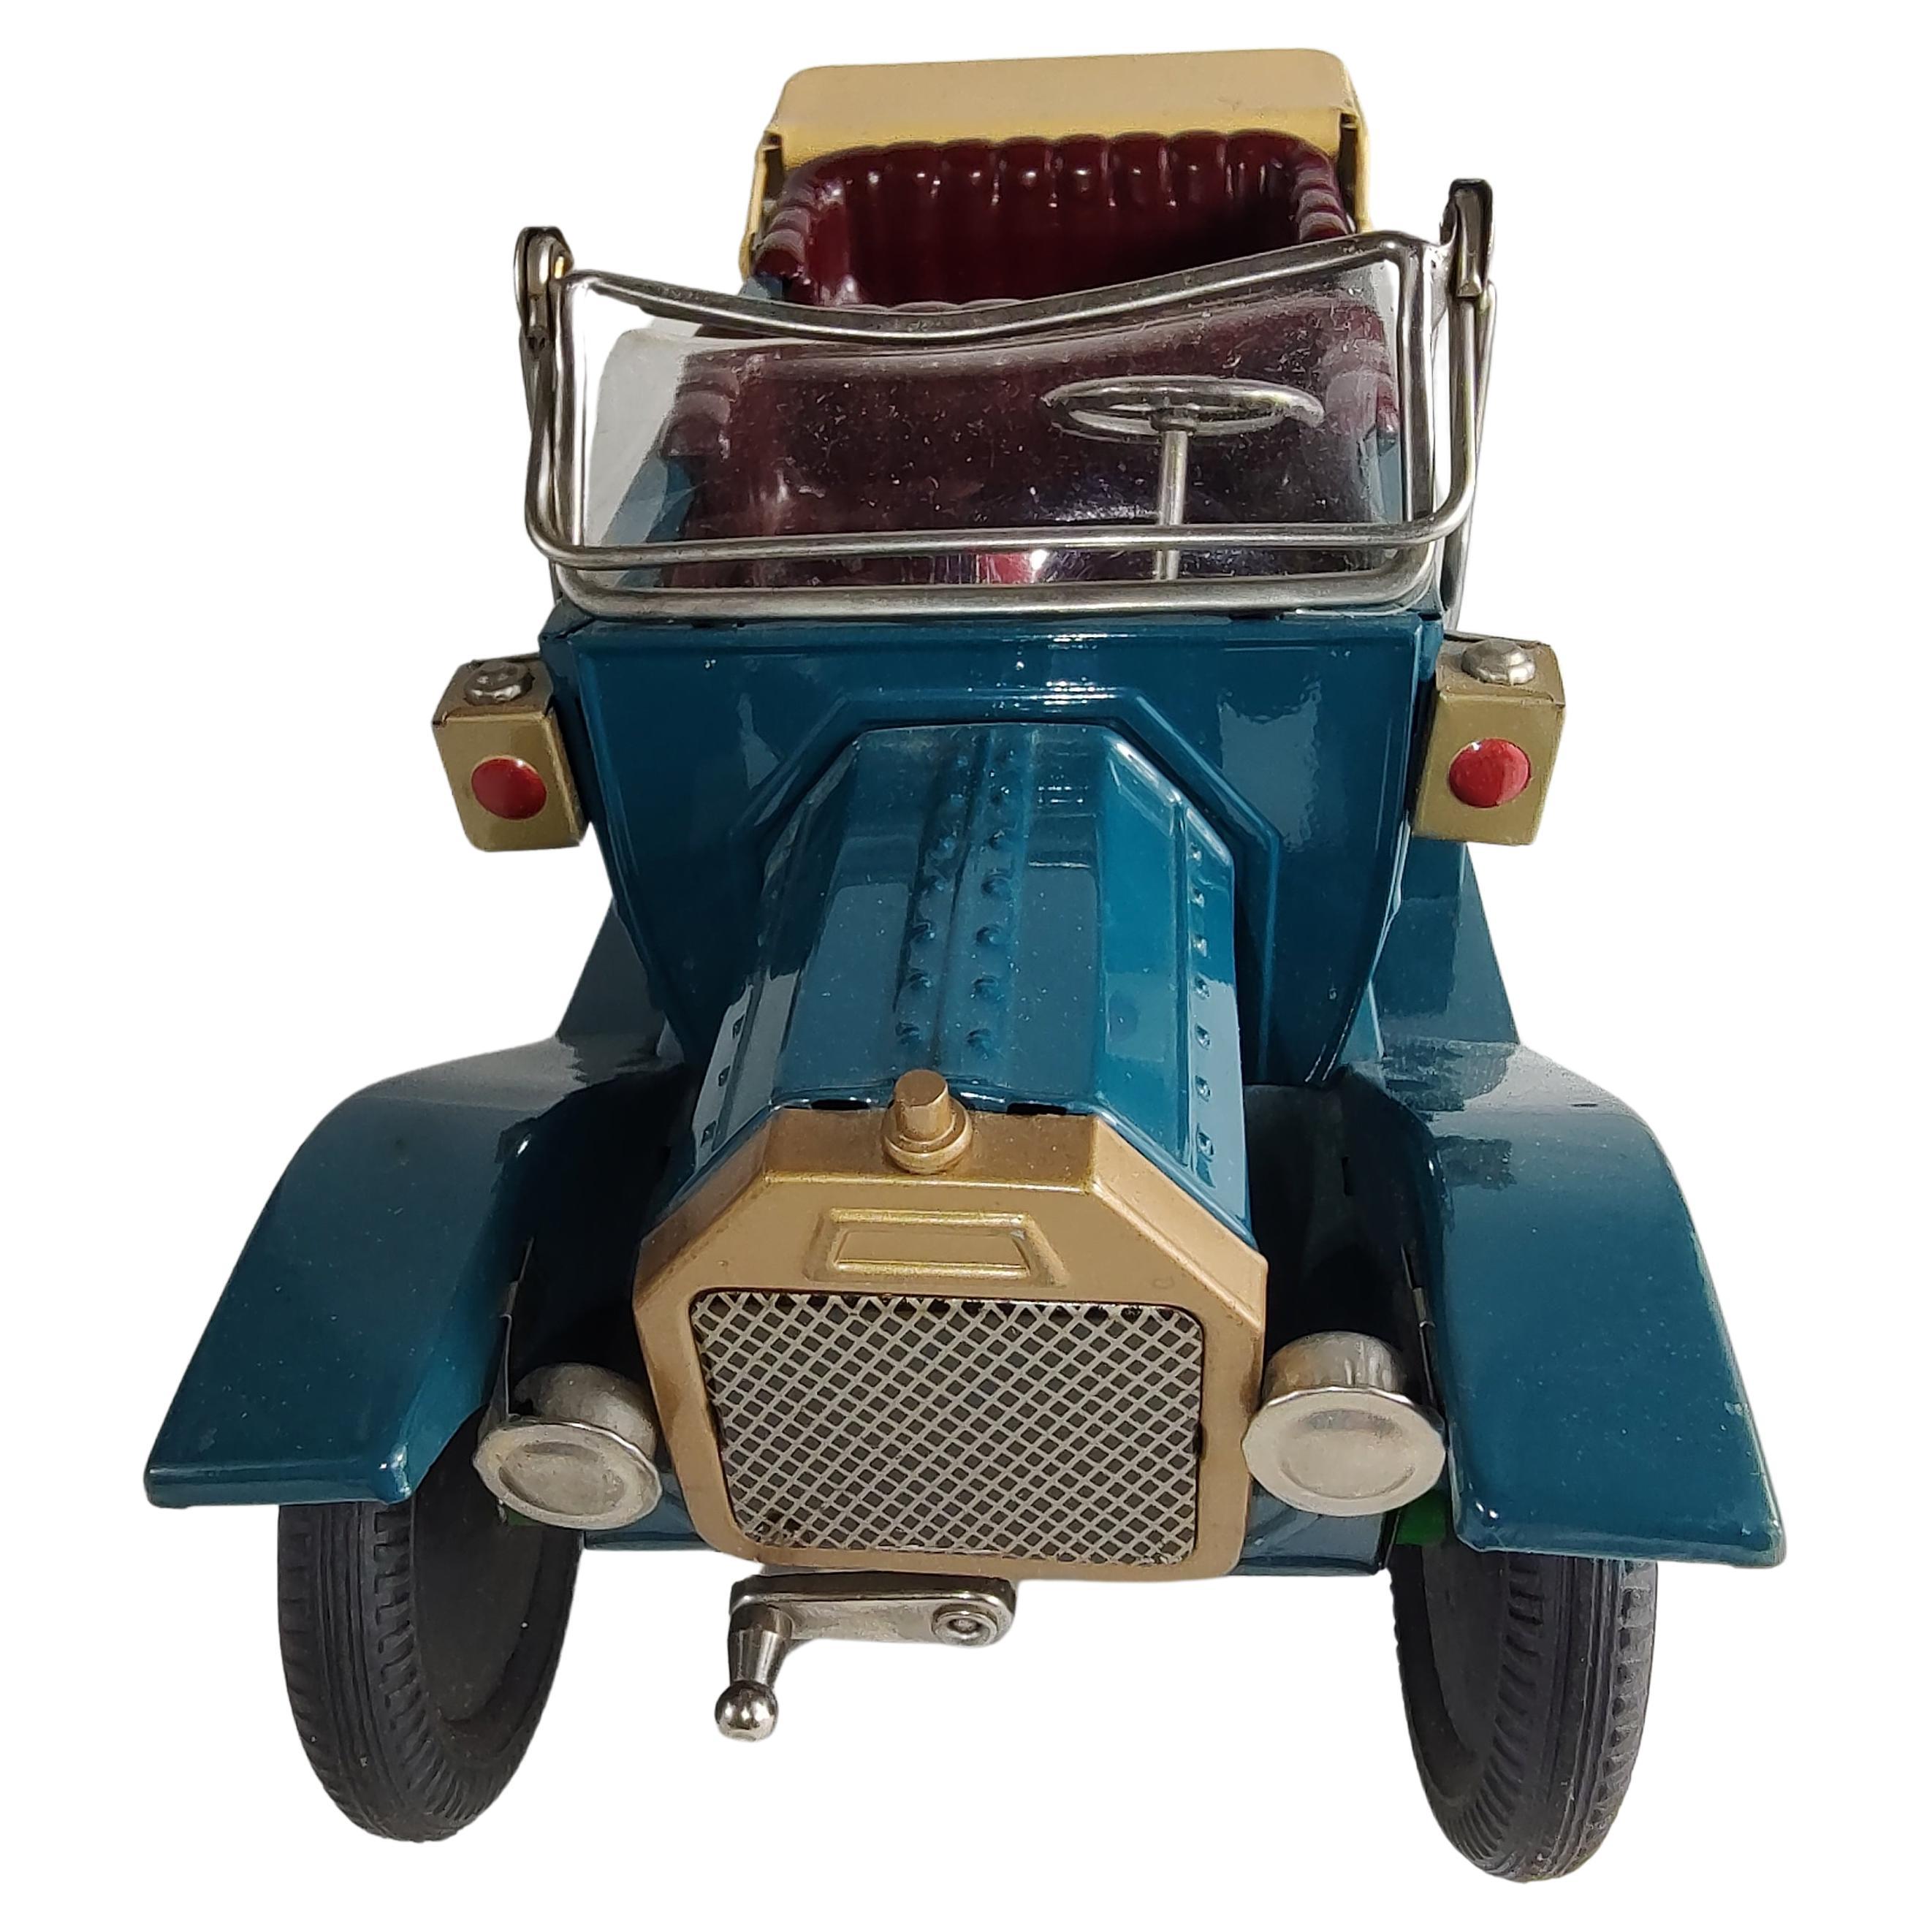 Japanese tin toy touring cars from the late 50s. In excellent antique condition, these toys were never played with. Friction cars, Near mint condition. Sat in boxes wrapped properly and stored in a heated home for over 60 years. Blue car is 9.5 x 4